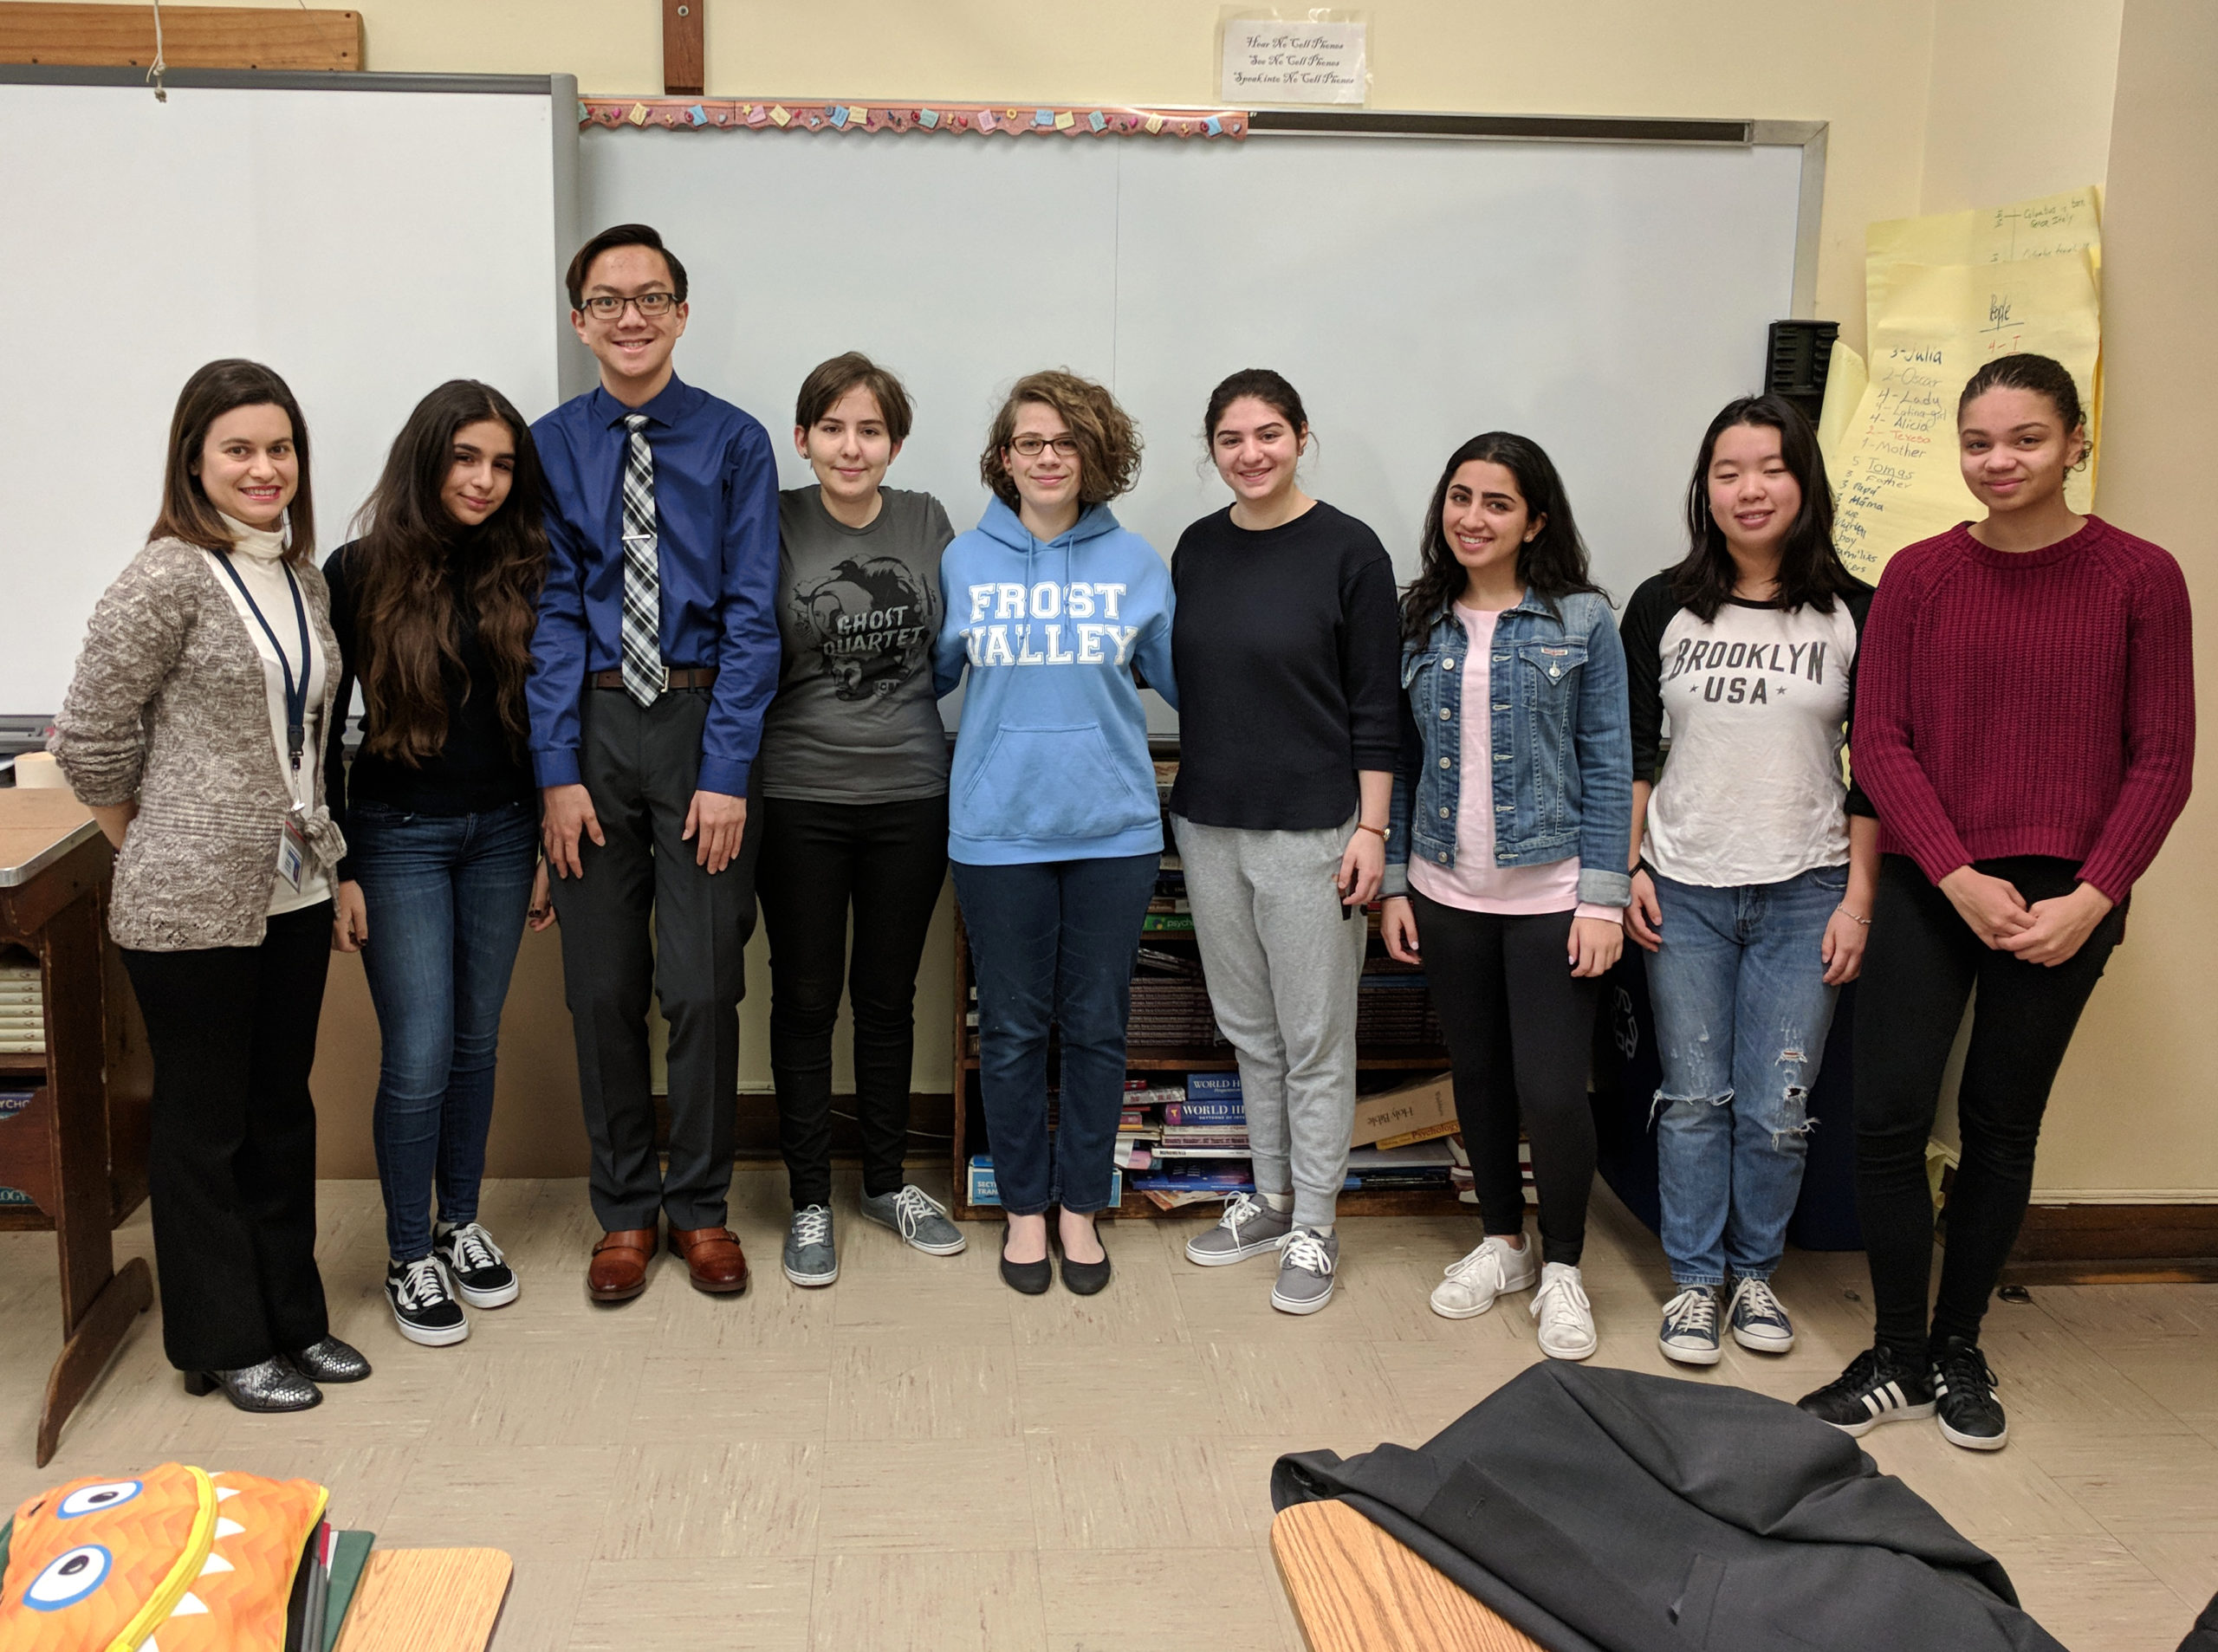 North High French teacher Ms. Asvestas congratulates several students who participated in the French Poetry Competition sponsored by the Nassau County Chapter of the American Association of Teachers of French: Adena Etaat, Christopher Lu, Rebecca Hirschhorn, Molly Racsko, Daisy Korman, Daniella Nakash, Chloe Chu, and Nina Phillips. (Photo courtesy of the Great Neck Public Schools)